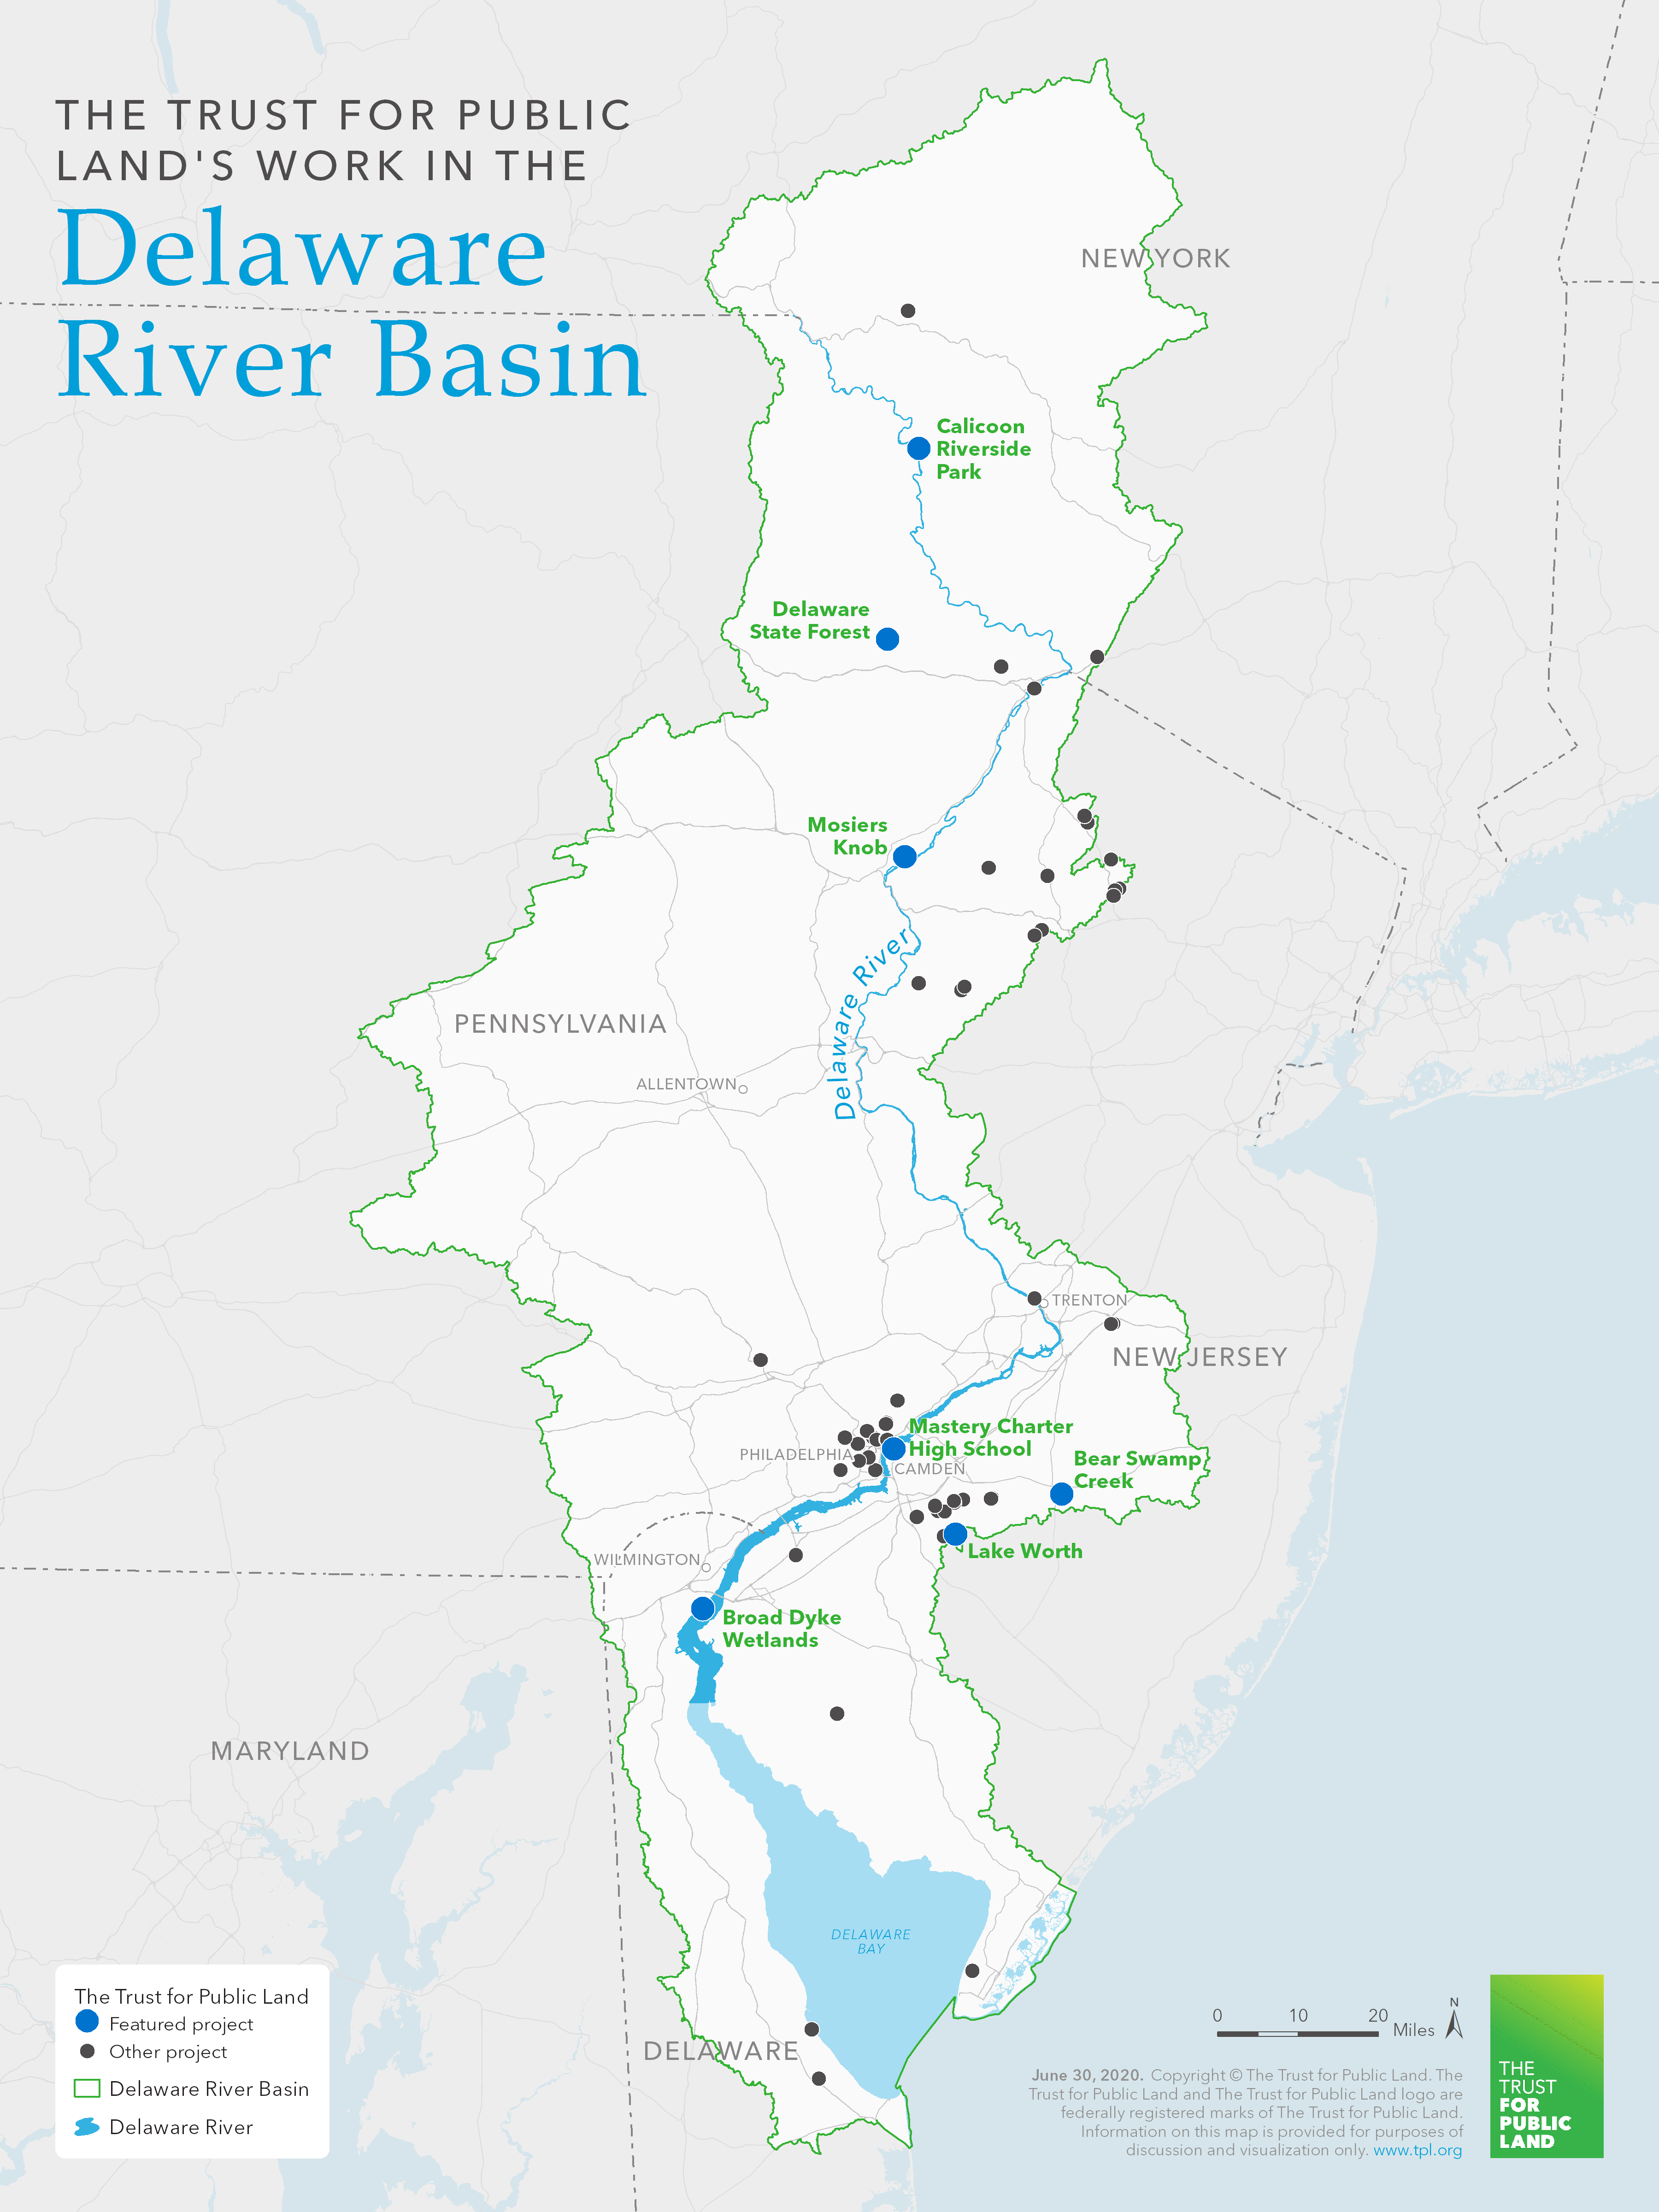 A map of the Delaware River Basin with a dot for every Trust for Public Land project